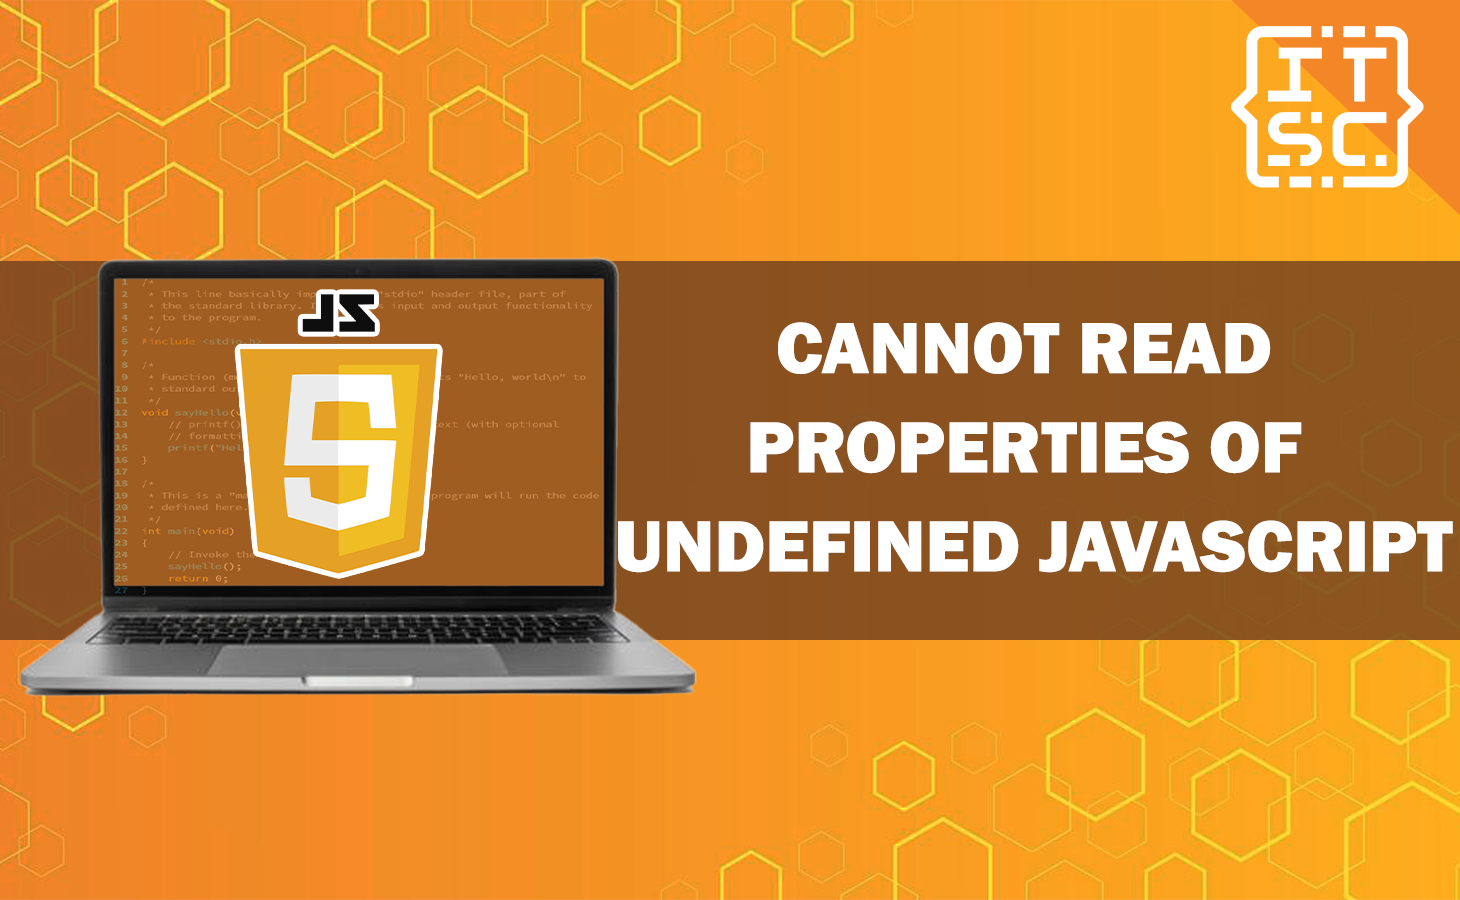 Cannot Read Properties of Undefined JavaScript